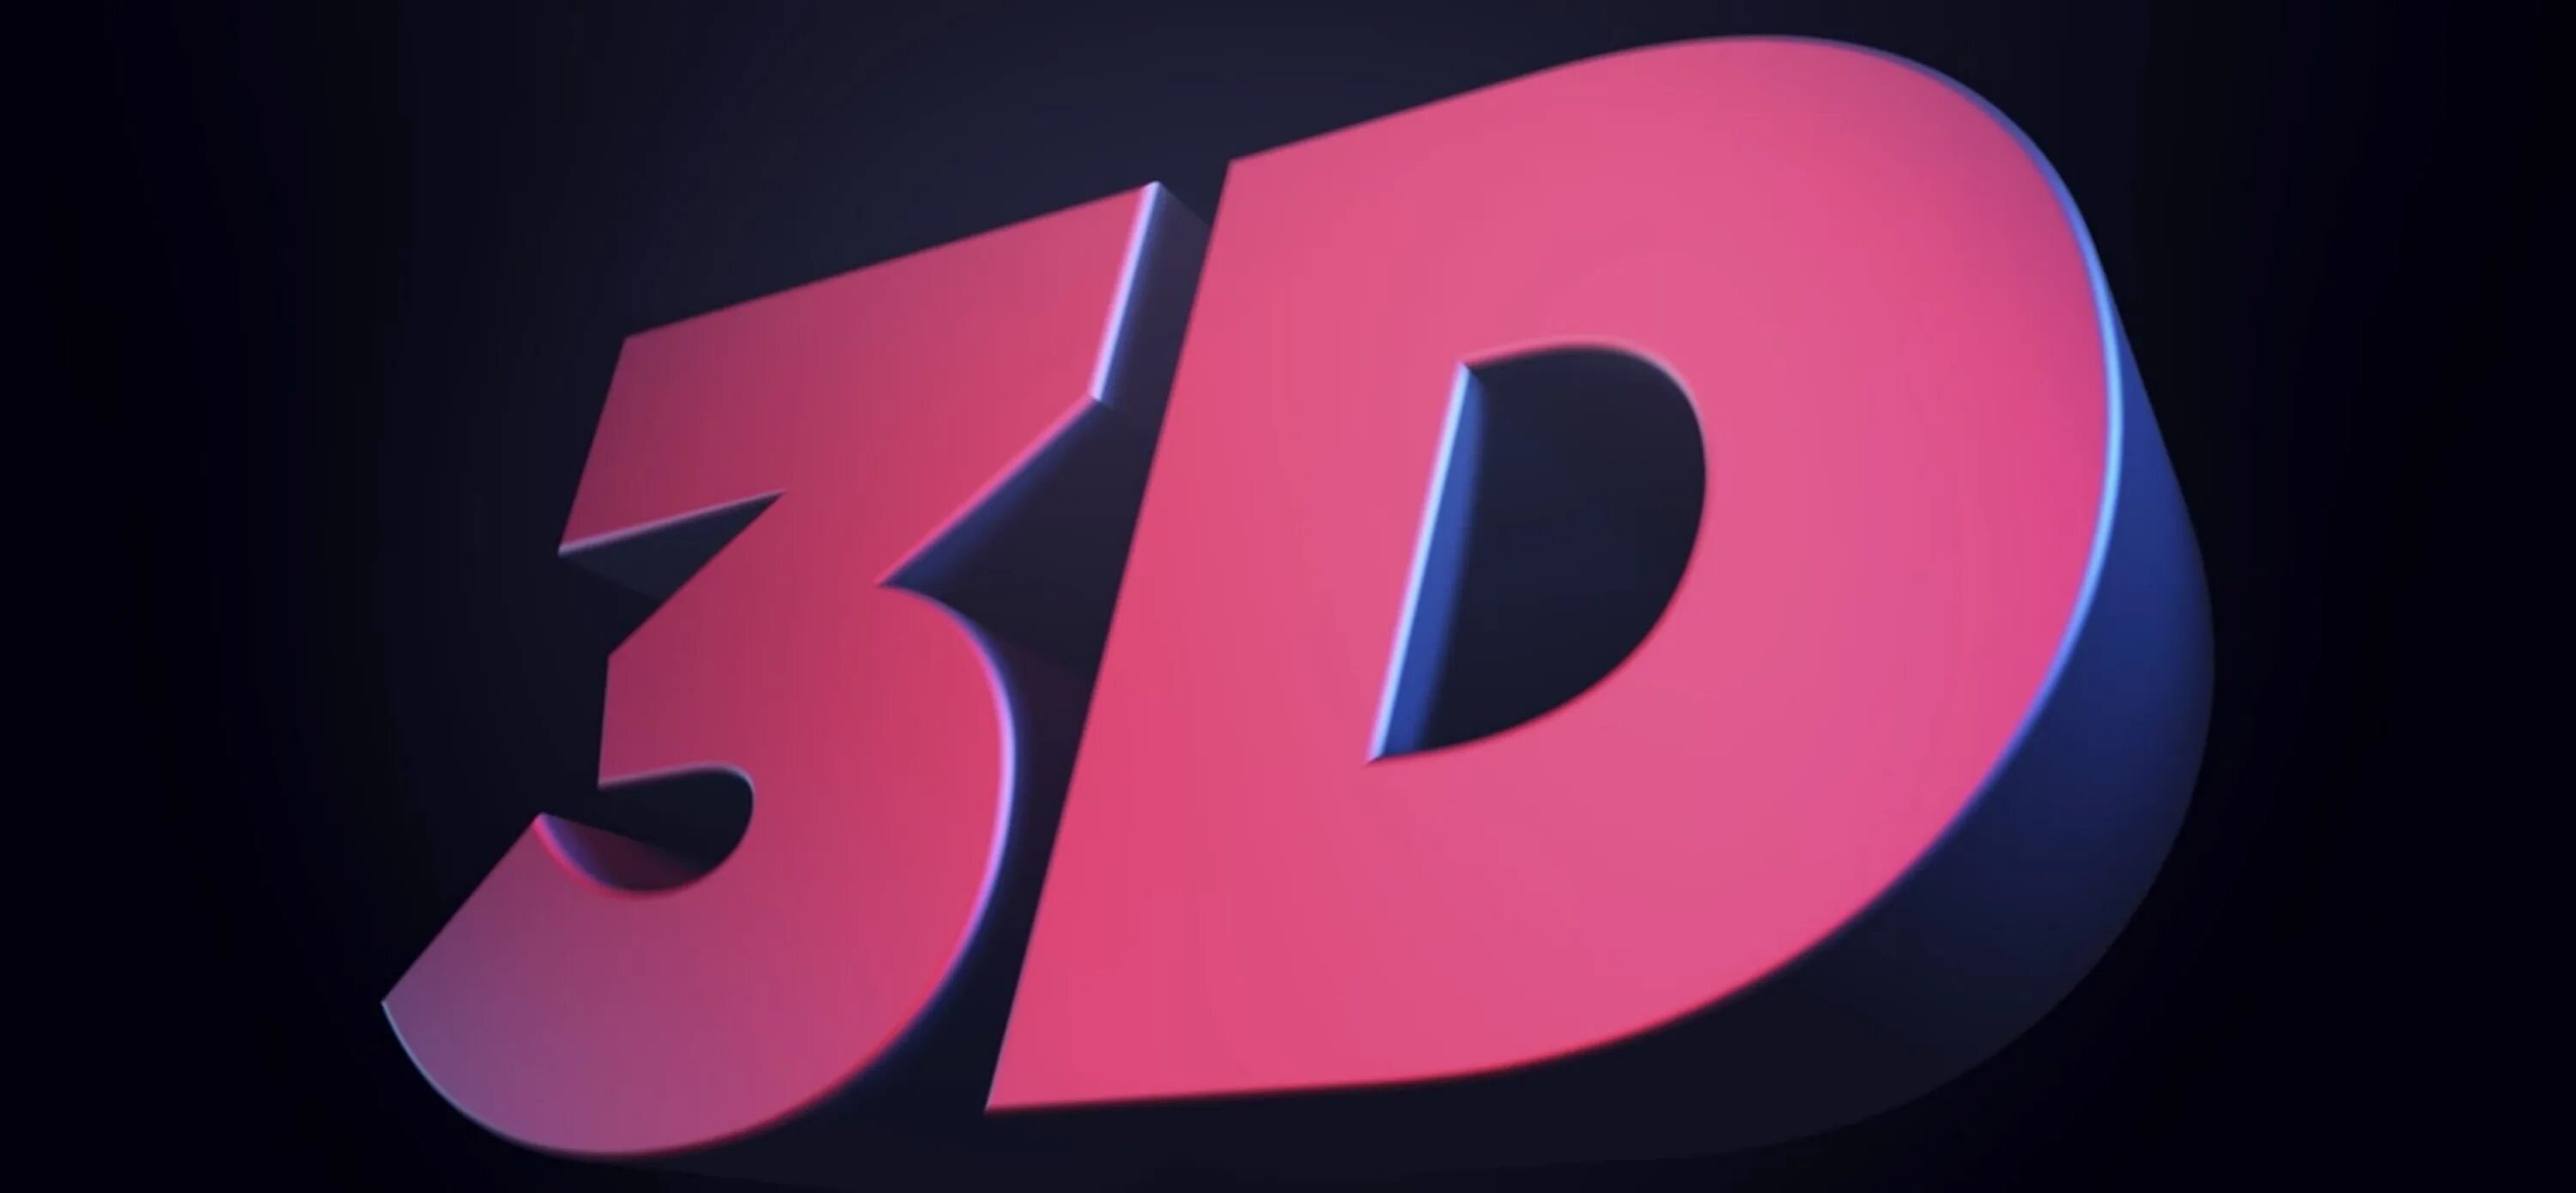 3д after effects. Логотипы 3д Афтер эффект. 3d текст Афтер эффект. After Effects 3d. Adobe after Effects 3d.